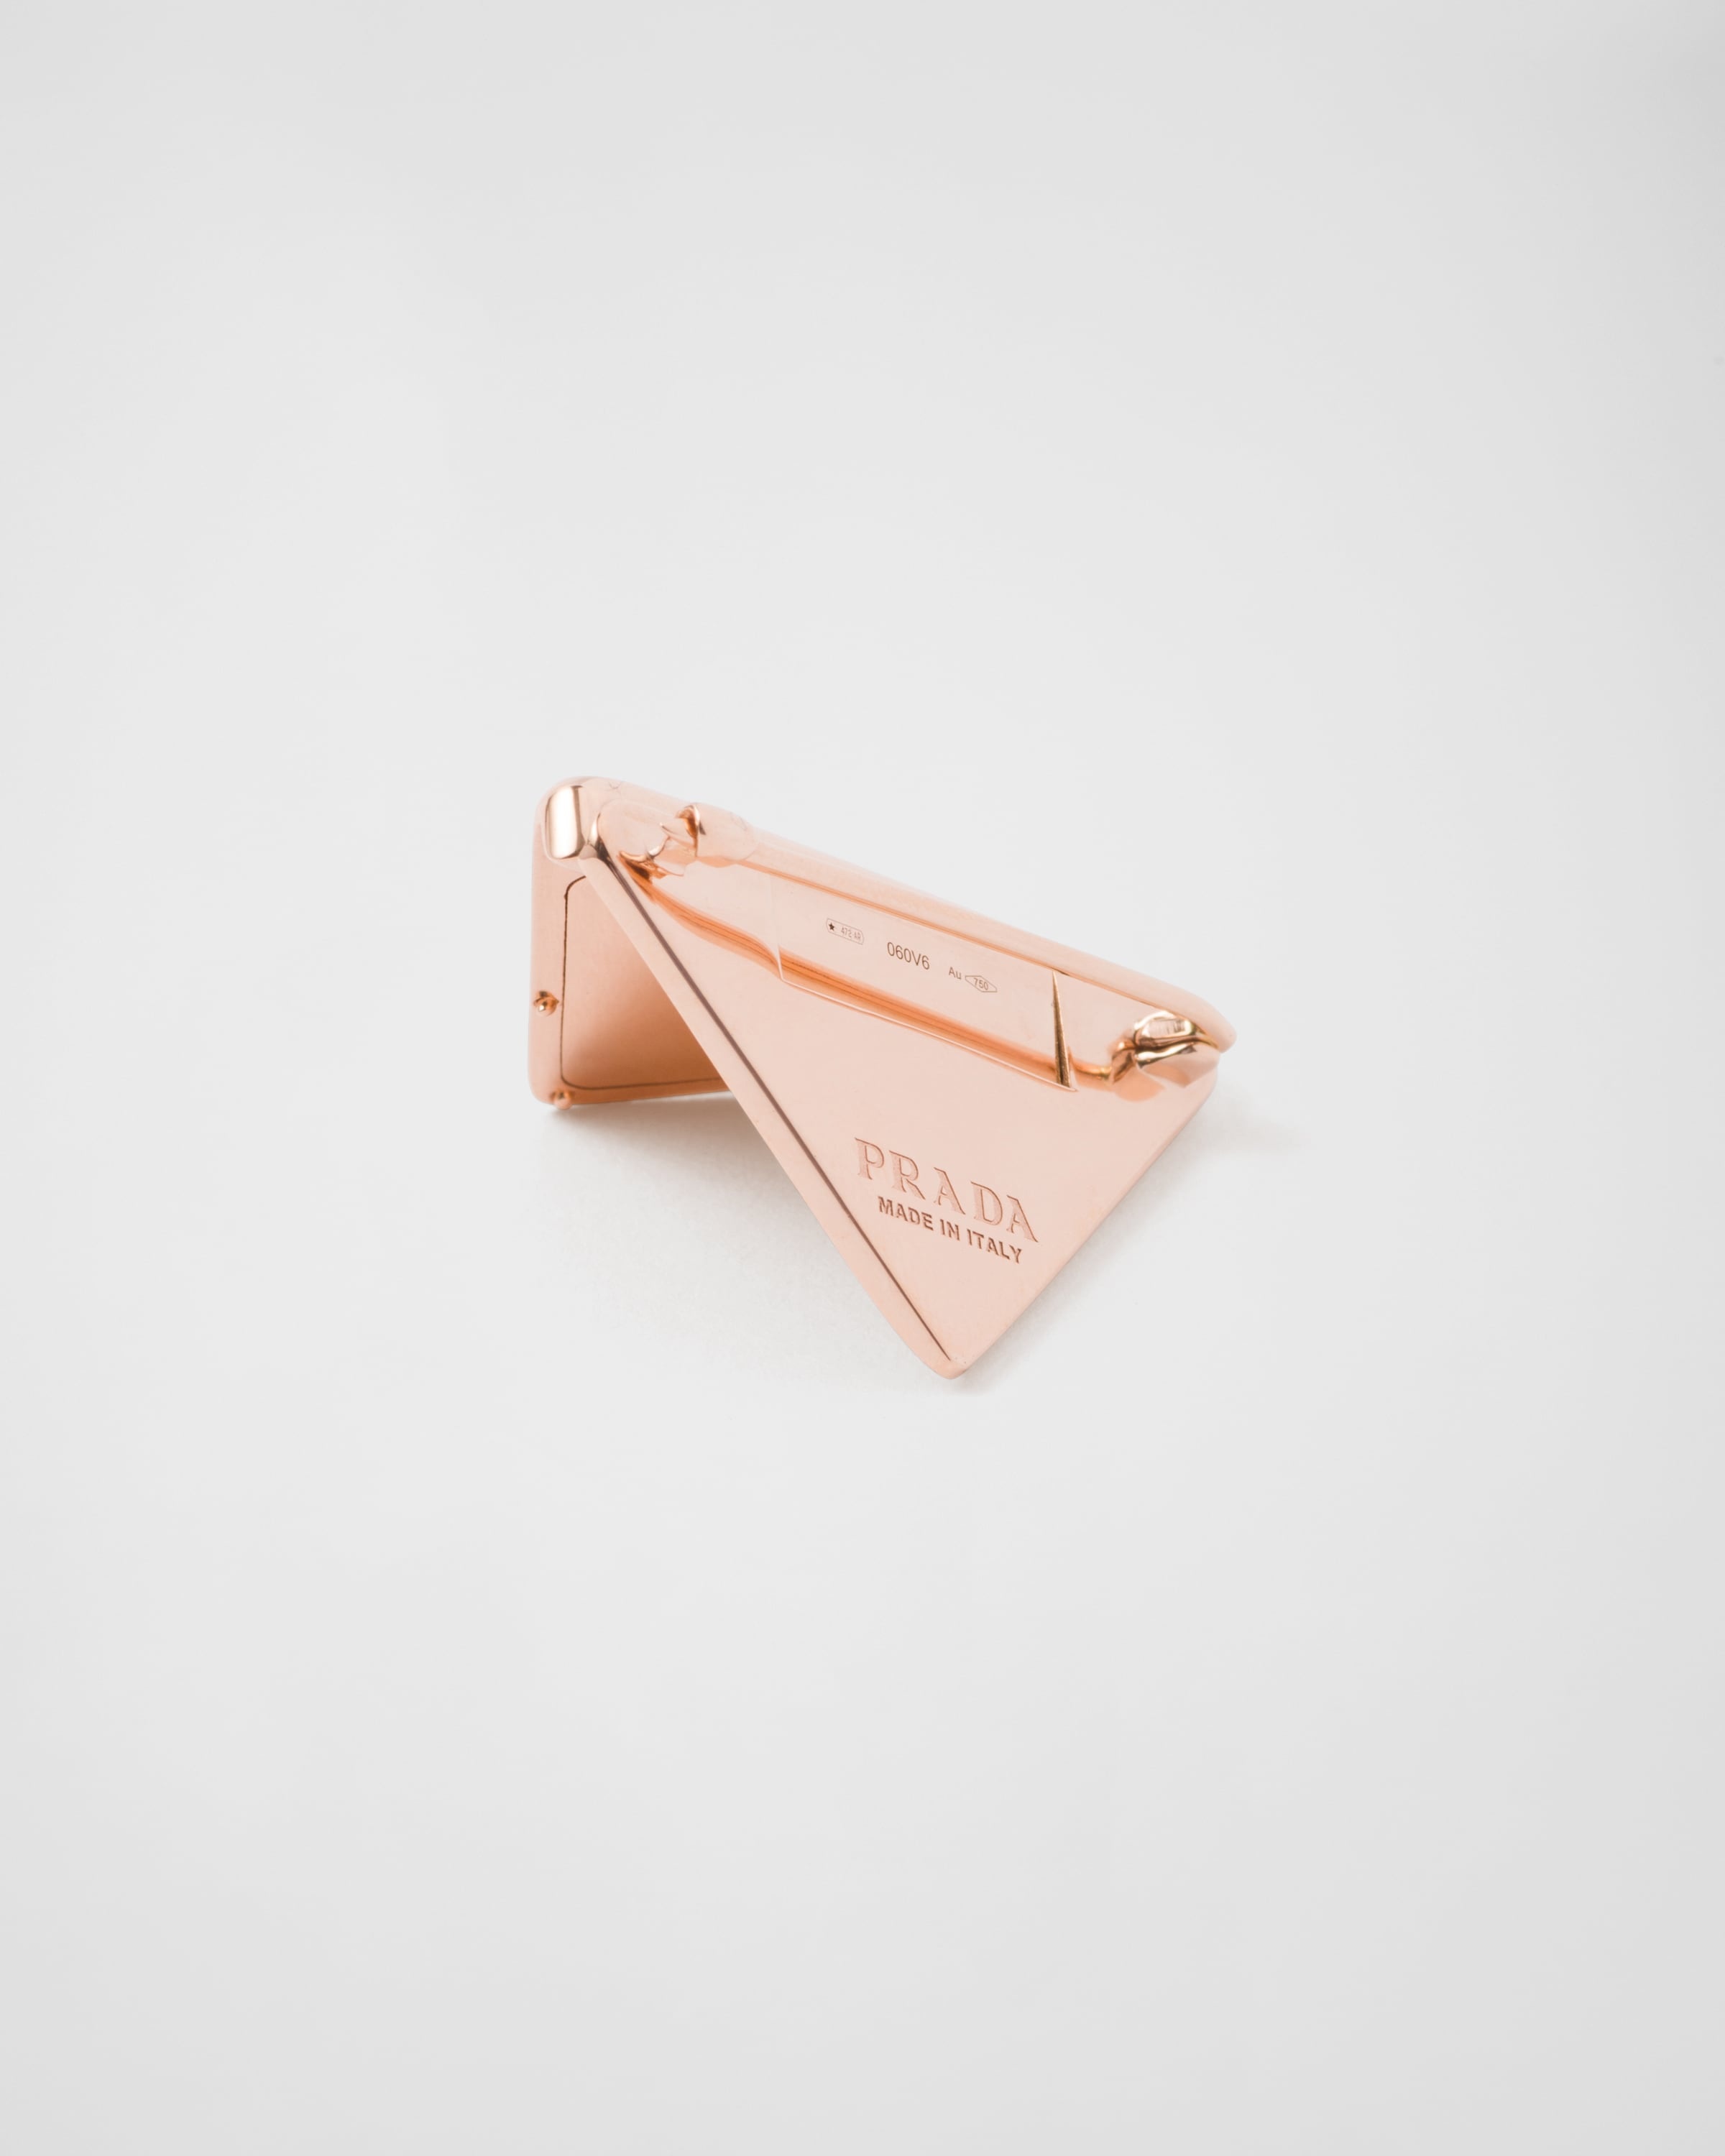 Eternal Gold small triangle brooch in pink gold - 2